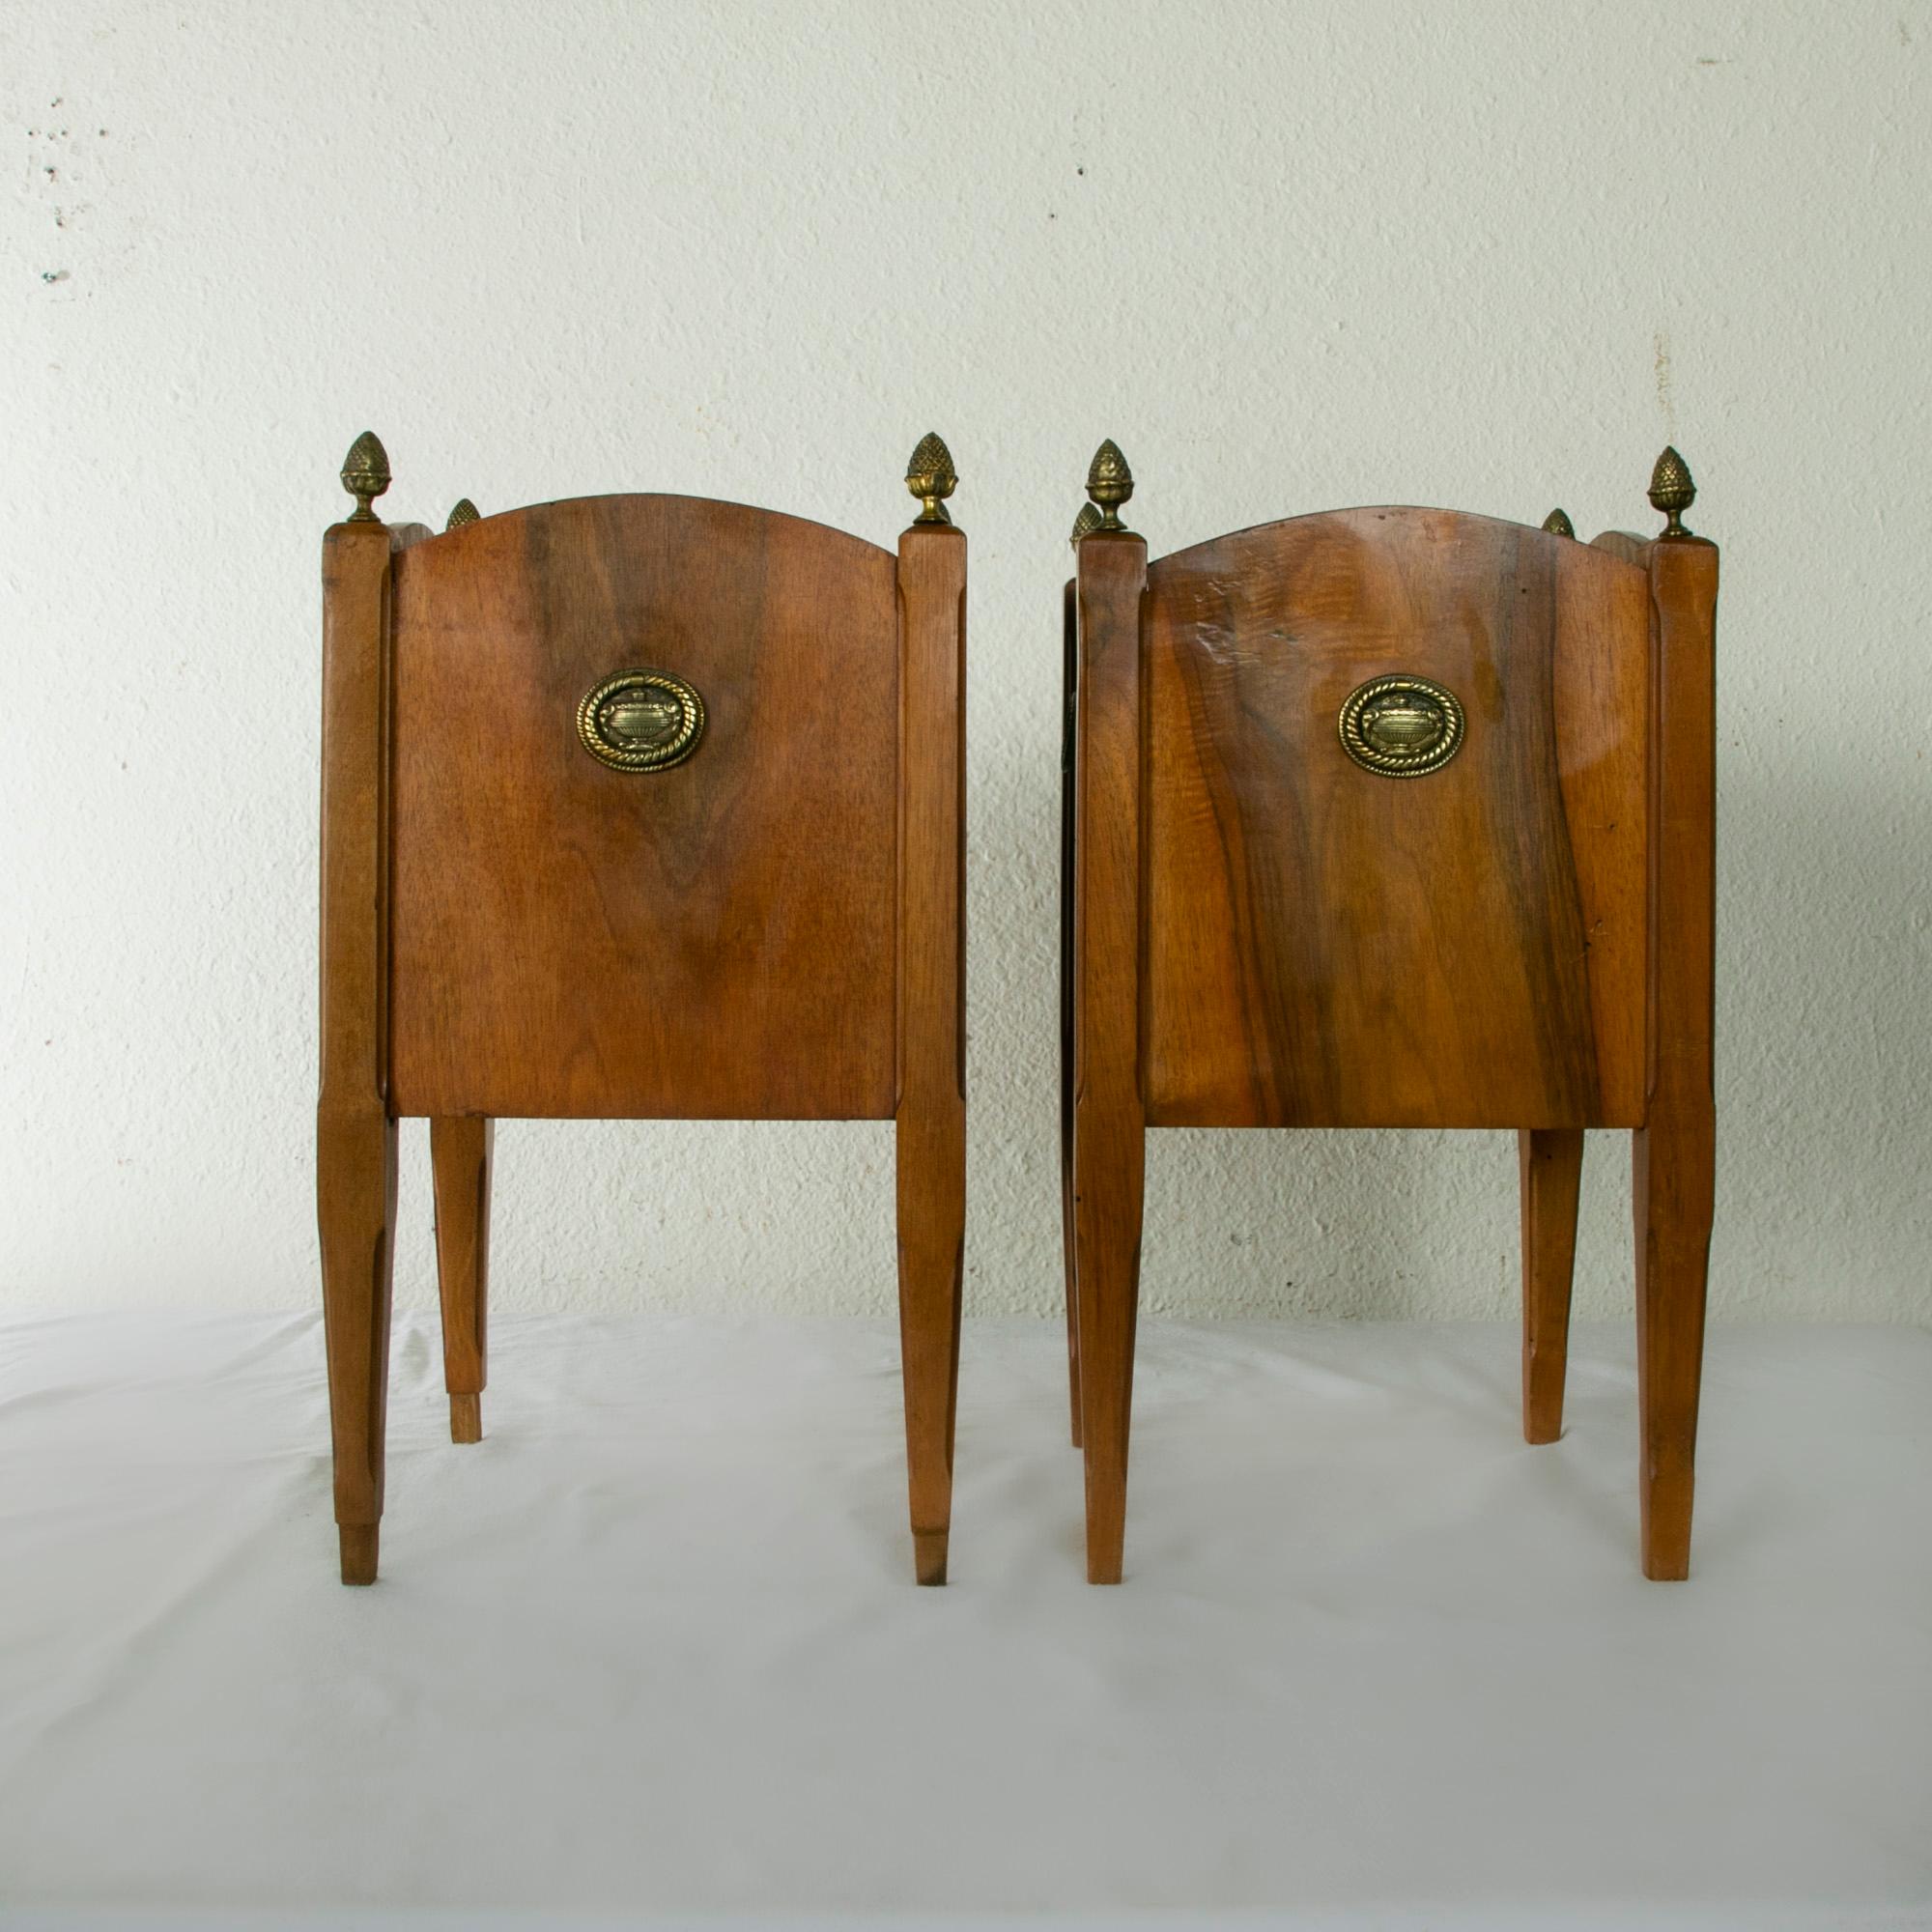 20th Century Pair of Mid-Century English Louis XVI Style Walnut Cachepots or Planters For Sale